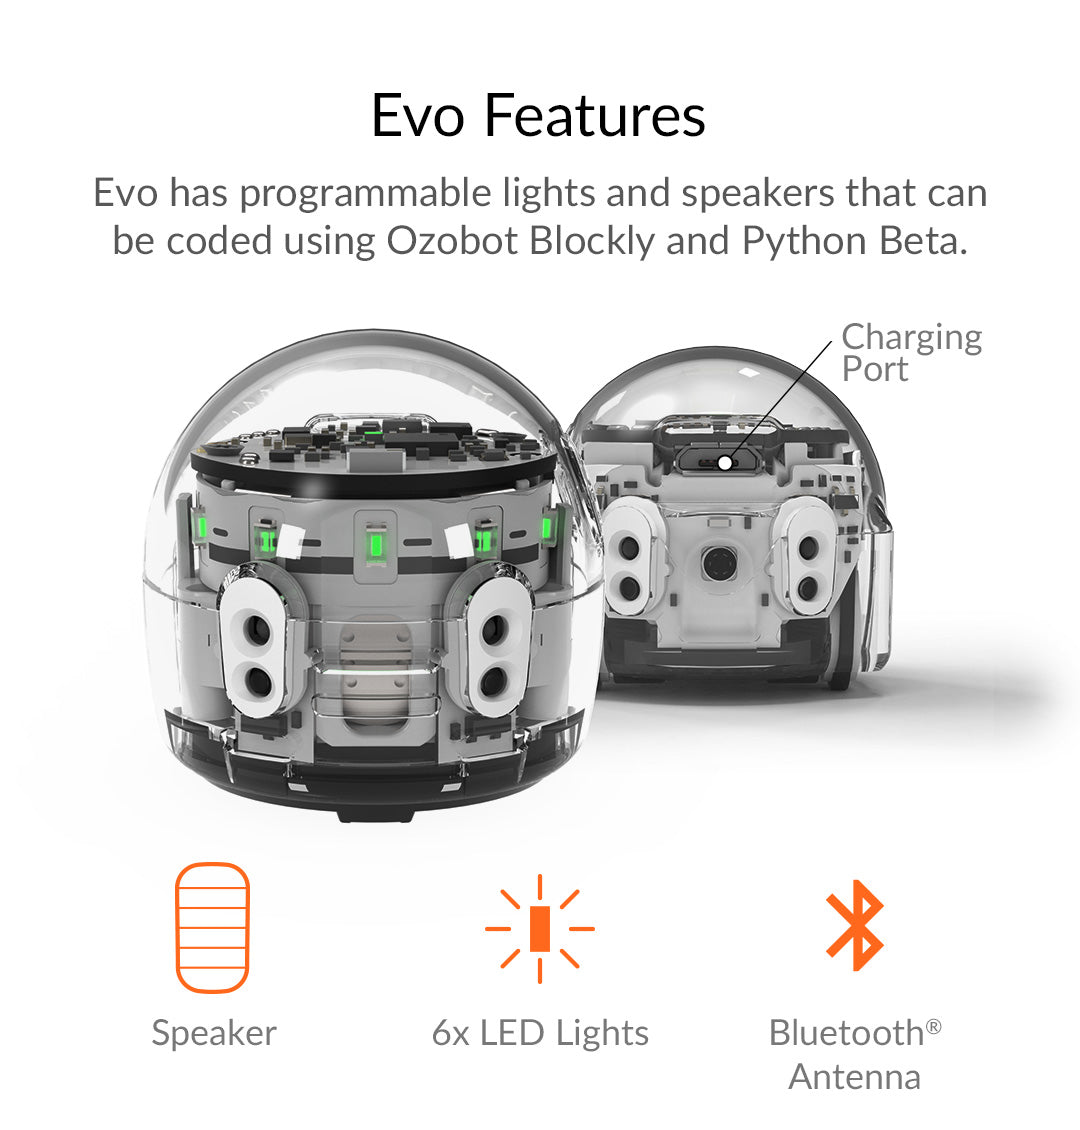 Buy Accessory Pack Stickers For Ozobot EVO on Robot Advance